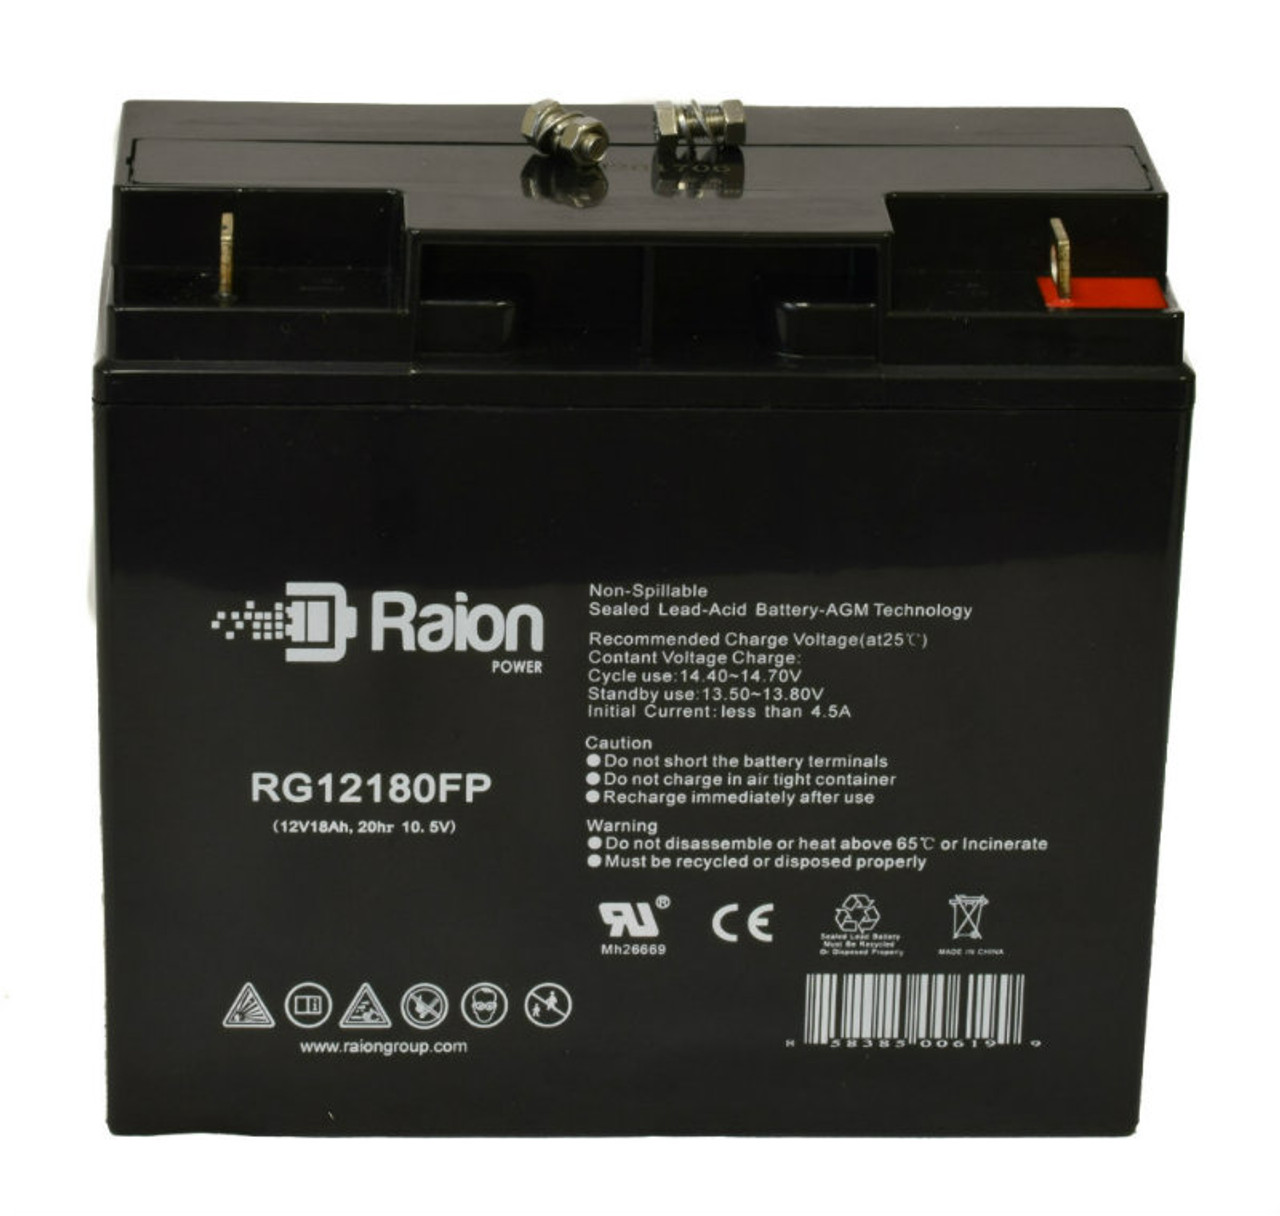 Raion Power RG12180FP 12V 18Ah AGM Battery for Quick Cable 604010-001 Booster Pack